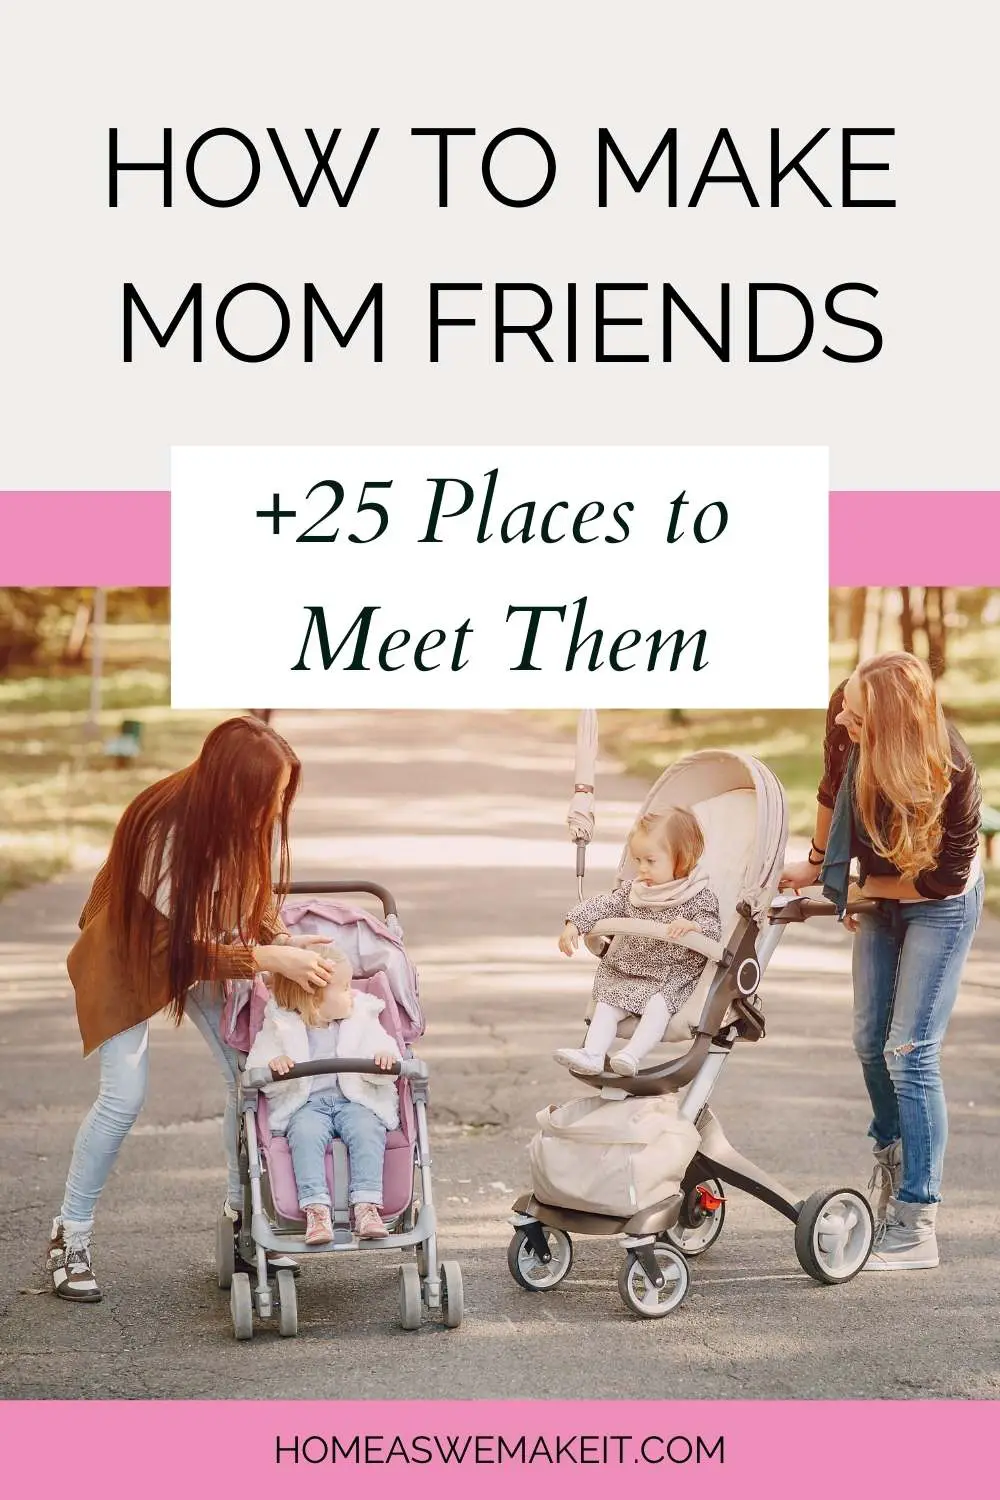 How to Make Mom Friends + 15 Places to Meet Them